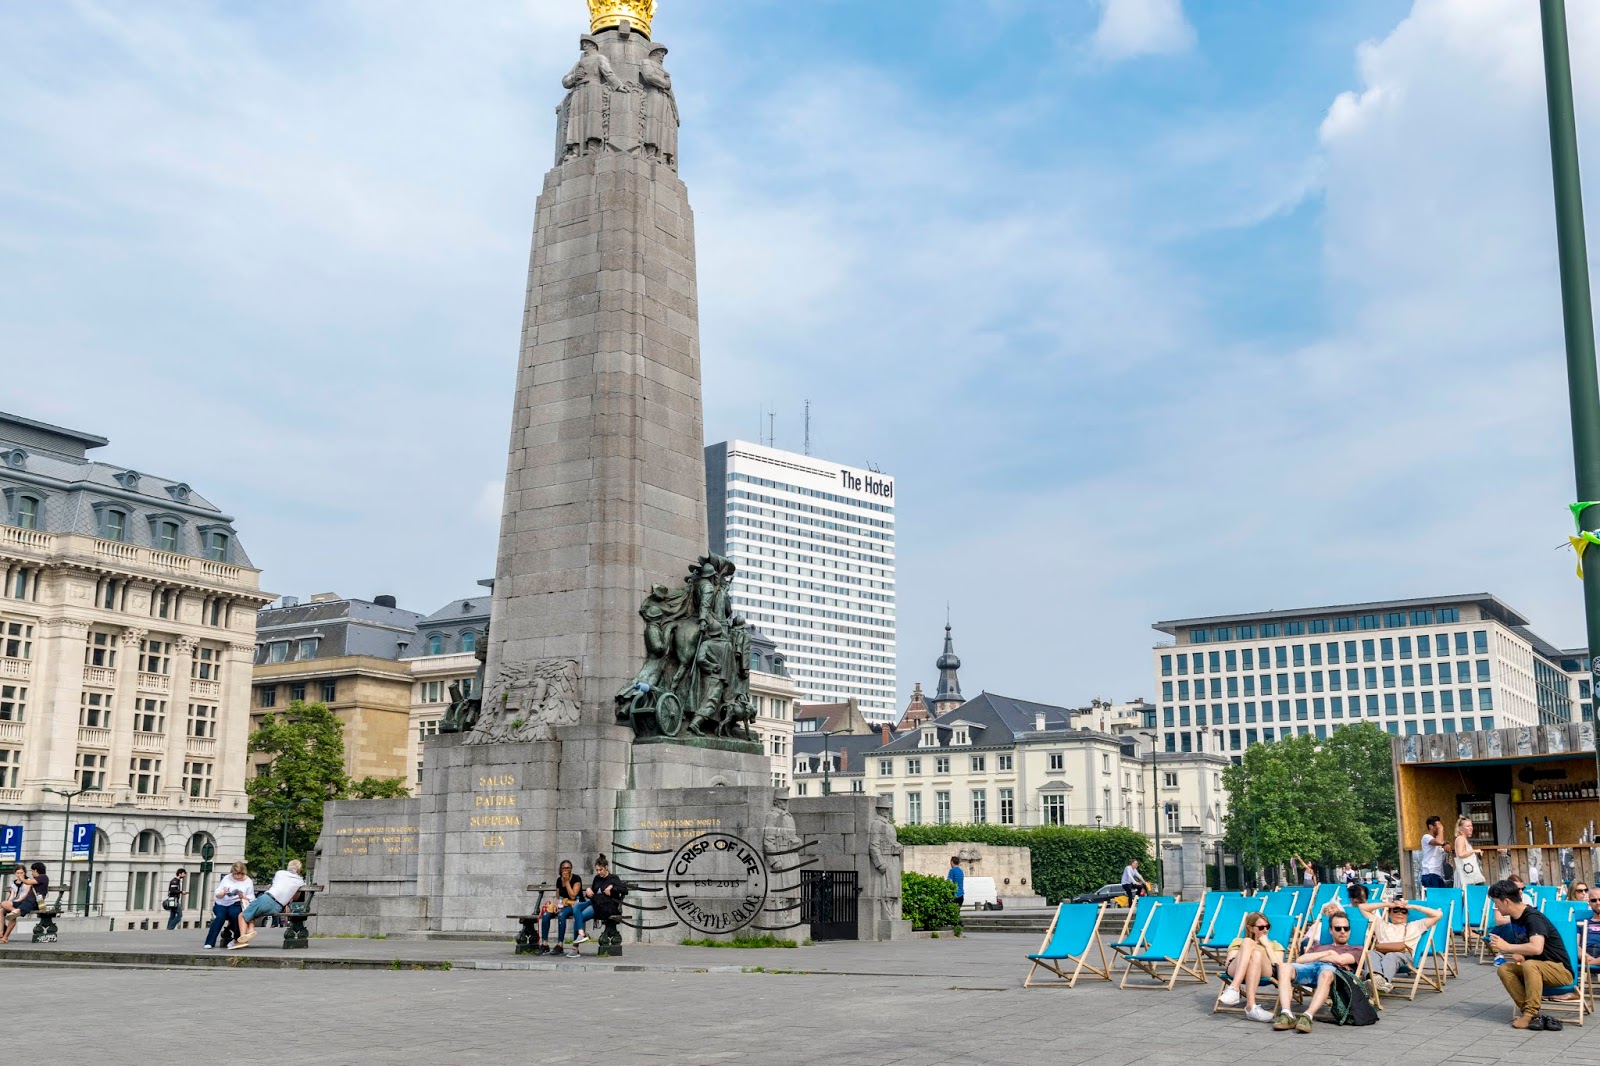 2 Days in Brussels - Things To Do and What to Eat